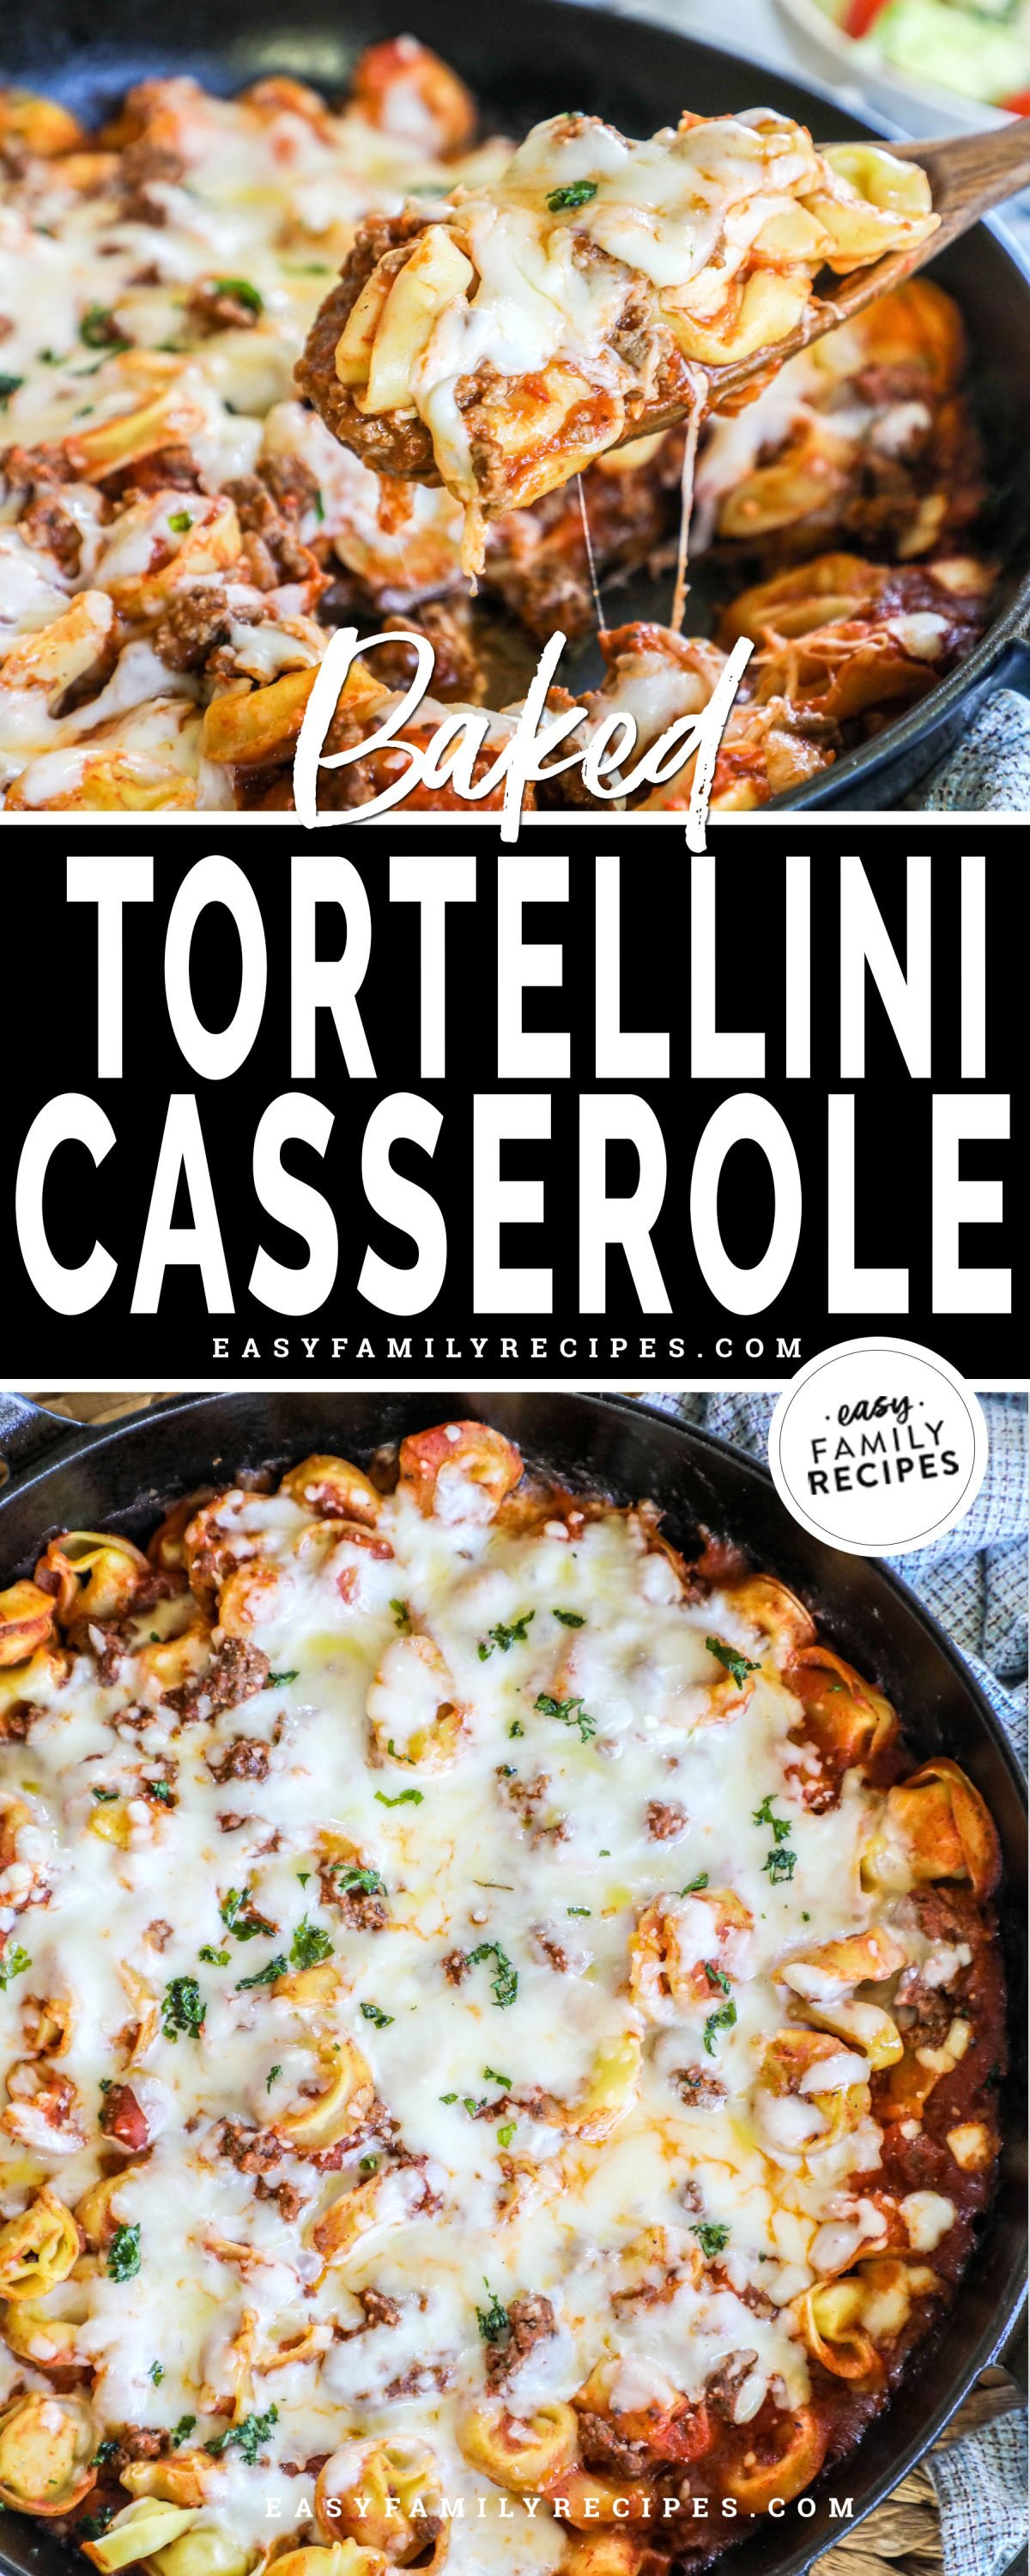 Top image: Spoon scooping baked tortellini from skillet, Bottom image: Overhead view of baked tortellini casserole 